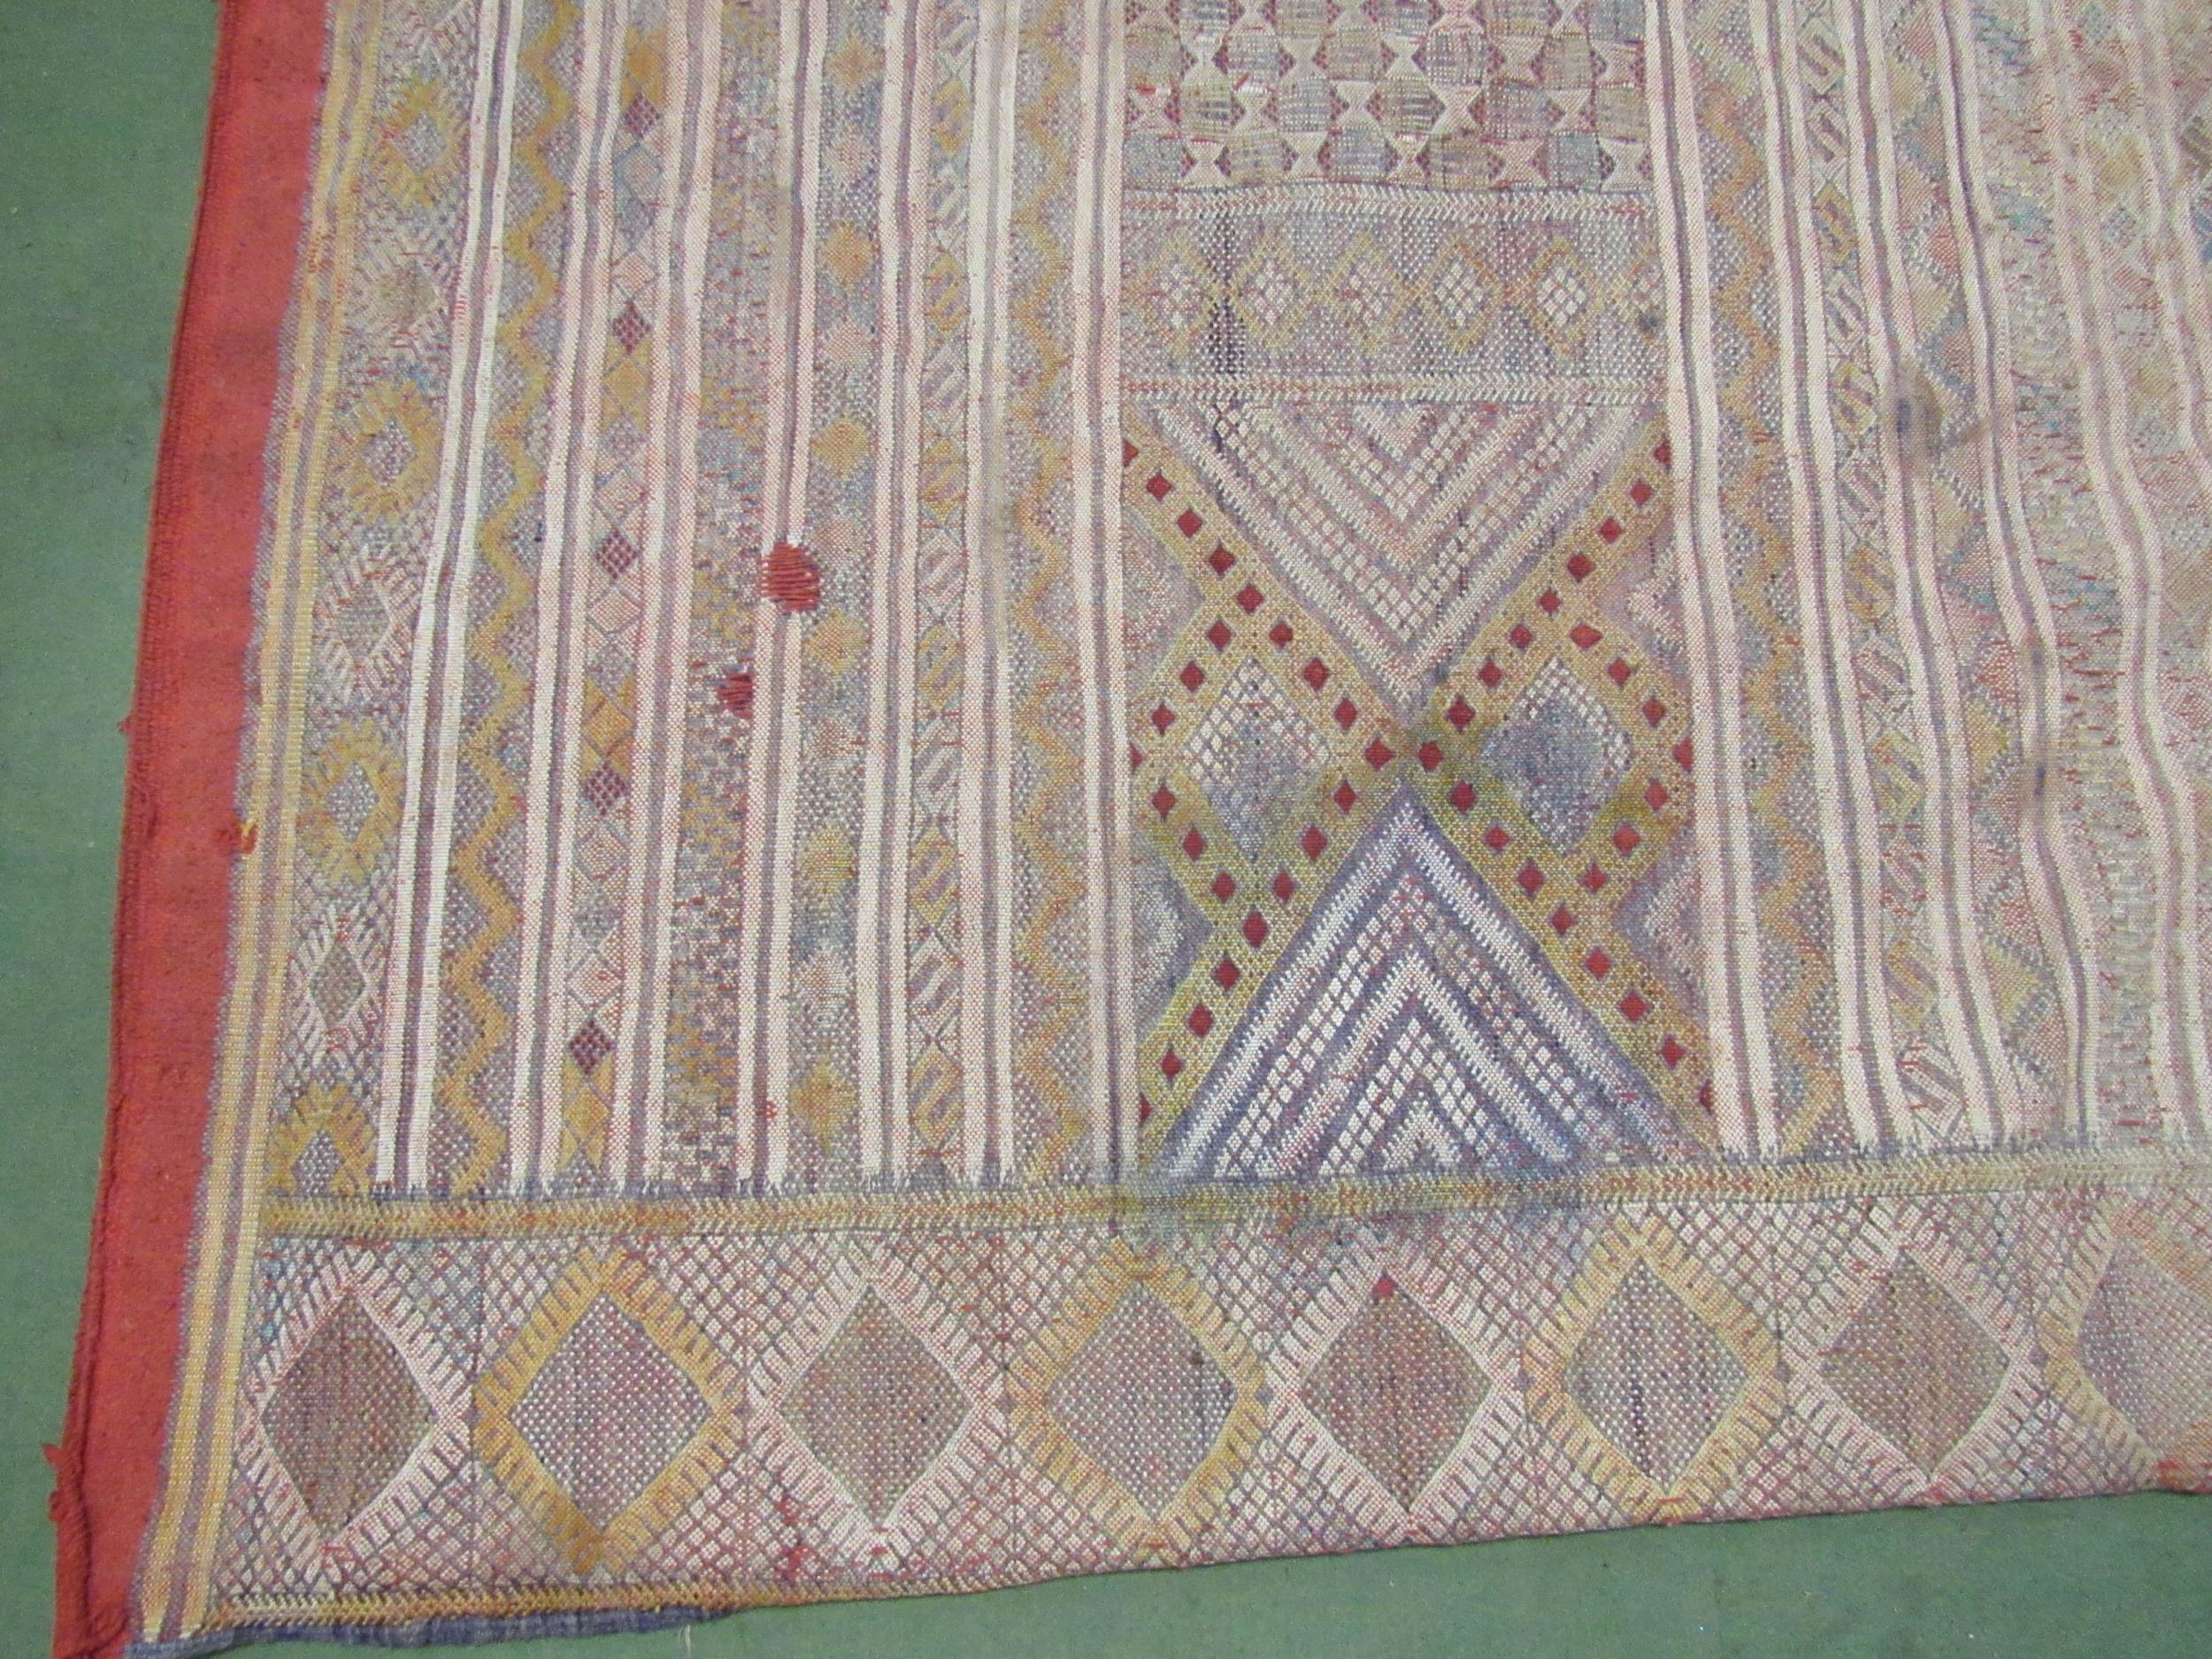 An Eastern hand woven geometric design rug, badly stained, a/f, 316cm x 178cm - Image 5 of 6